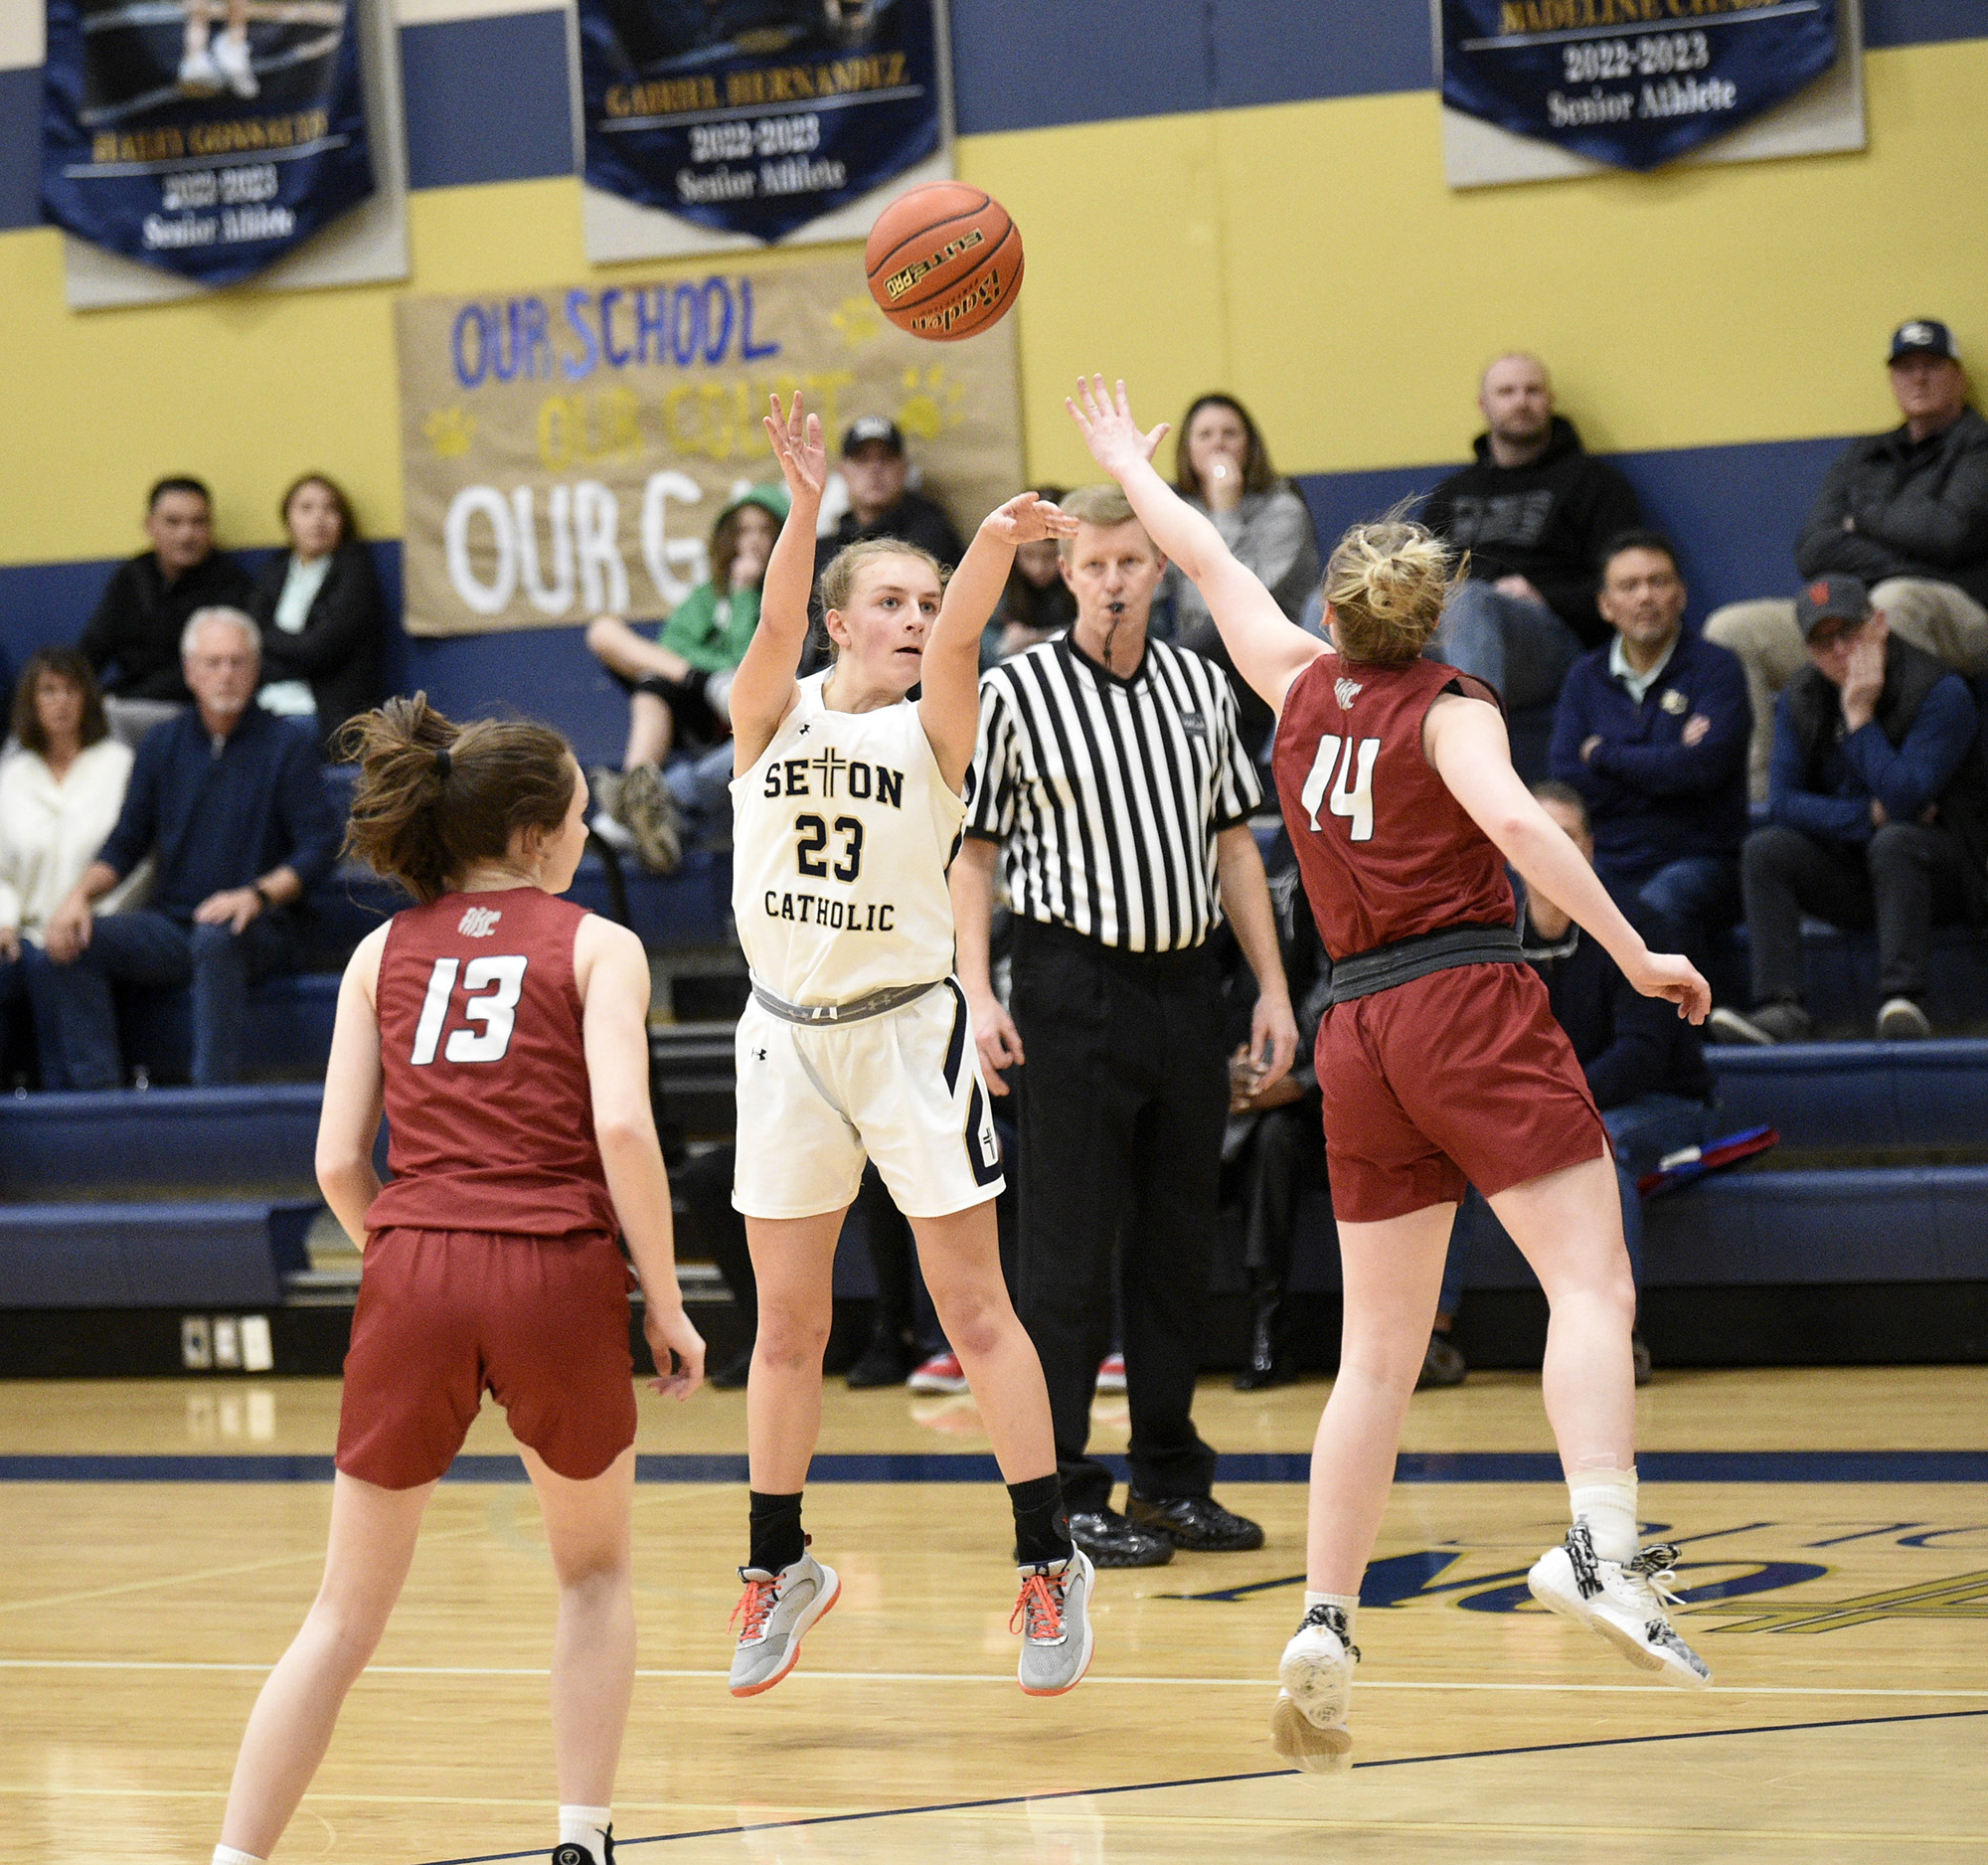 Remy Jenniges of Seton Catholic (23) takes a shot during the Cougars’ 56-45 win over Hoquiam in the 1A district girls basketball semifinal at Seton Catholic High School on Saturday, Feb. 11, 2023.